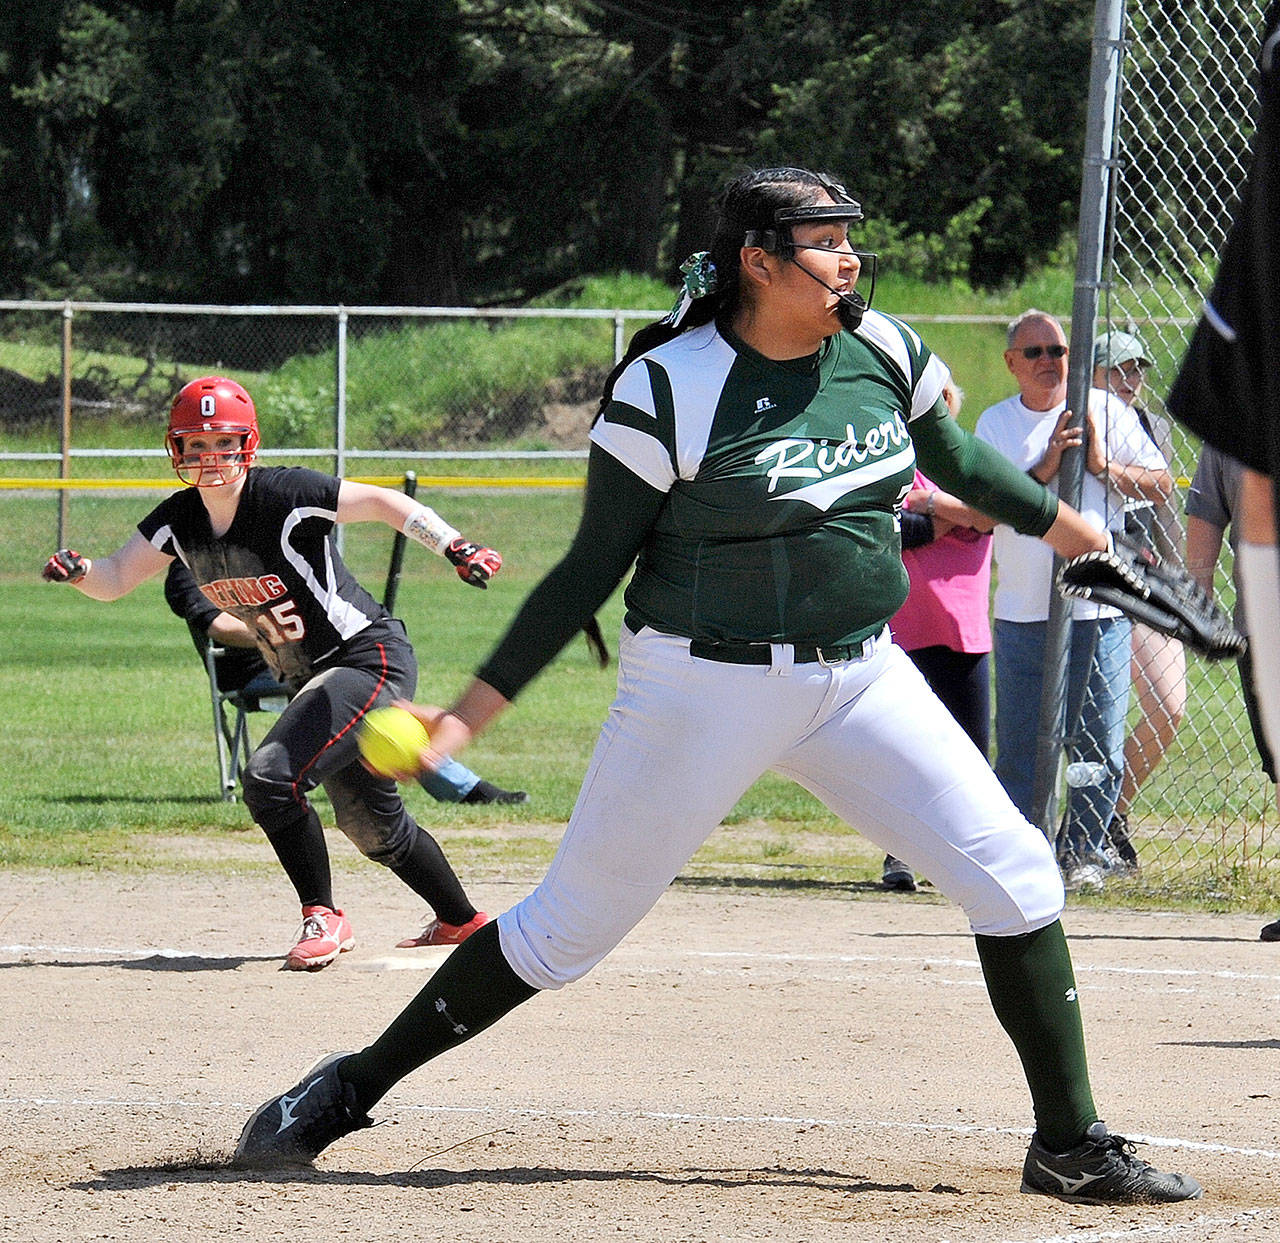 Lonnie Archibald/for Peninsula Daily News Port Angeles’ Nizhoni Wheeler delivers a pitch in the Roughriders’ West Central District 3 semifinal 16-0 win over Orting. The Riders went on to beat White River 13-2 in the district championship game later in the day.